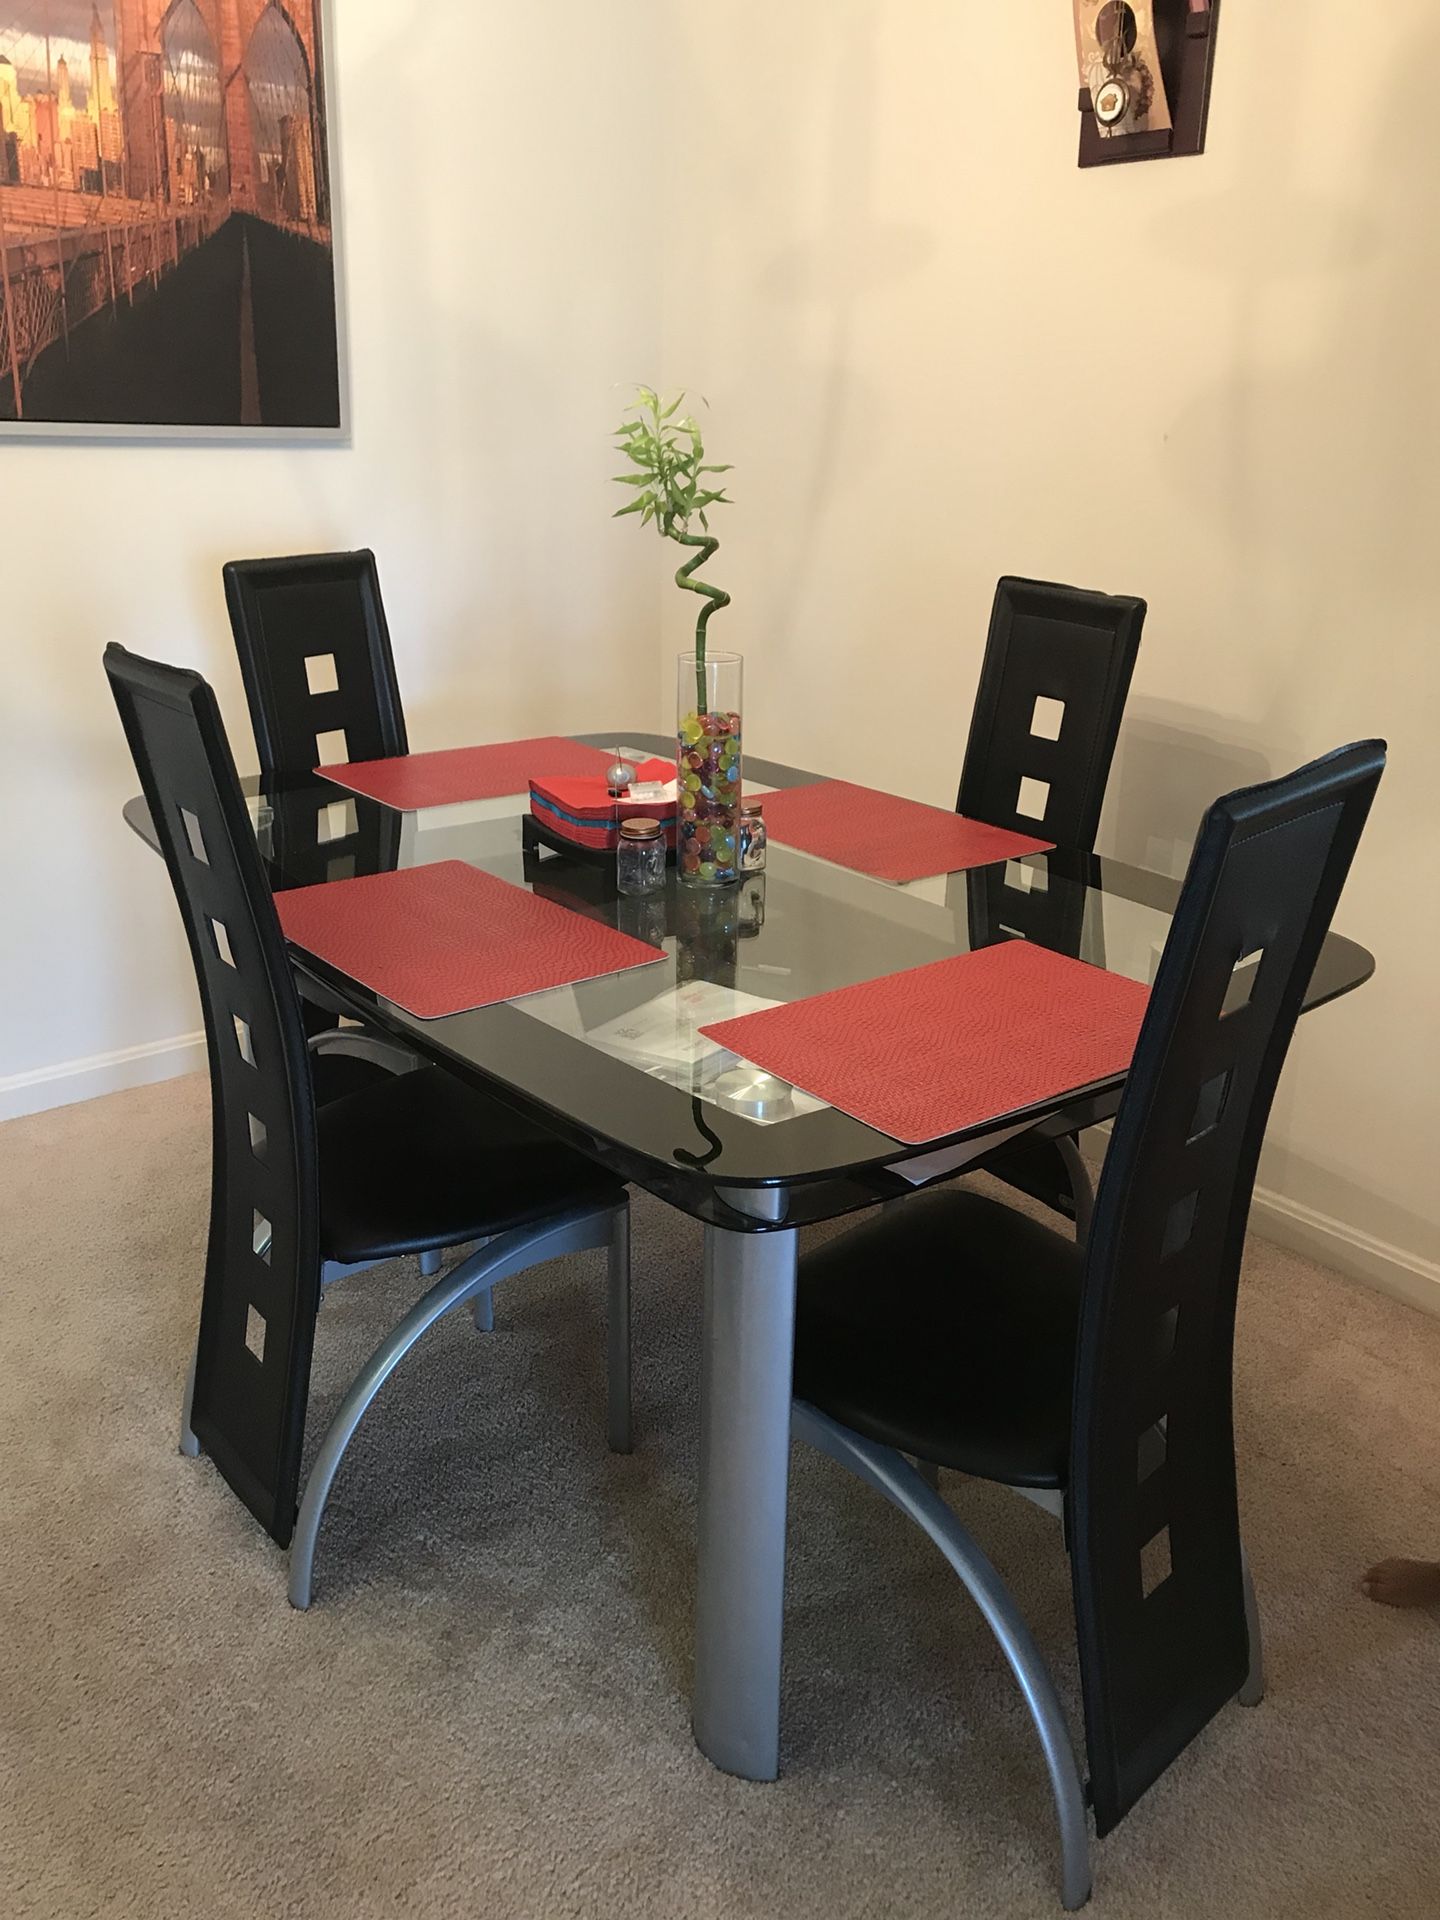 IKEA glass dining table